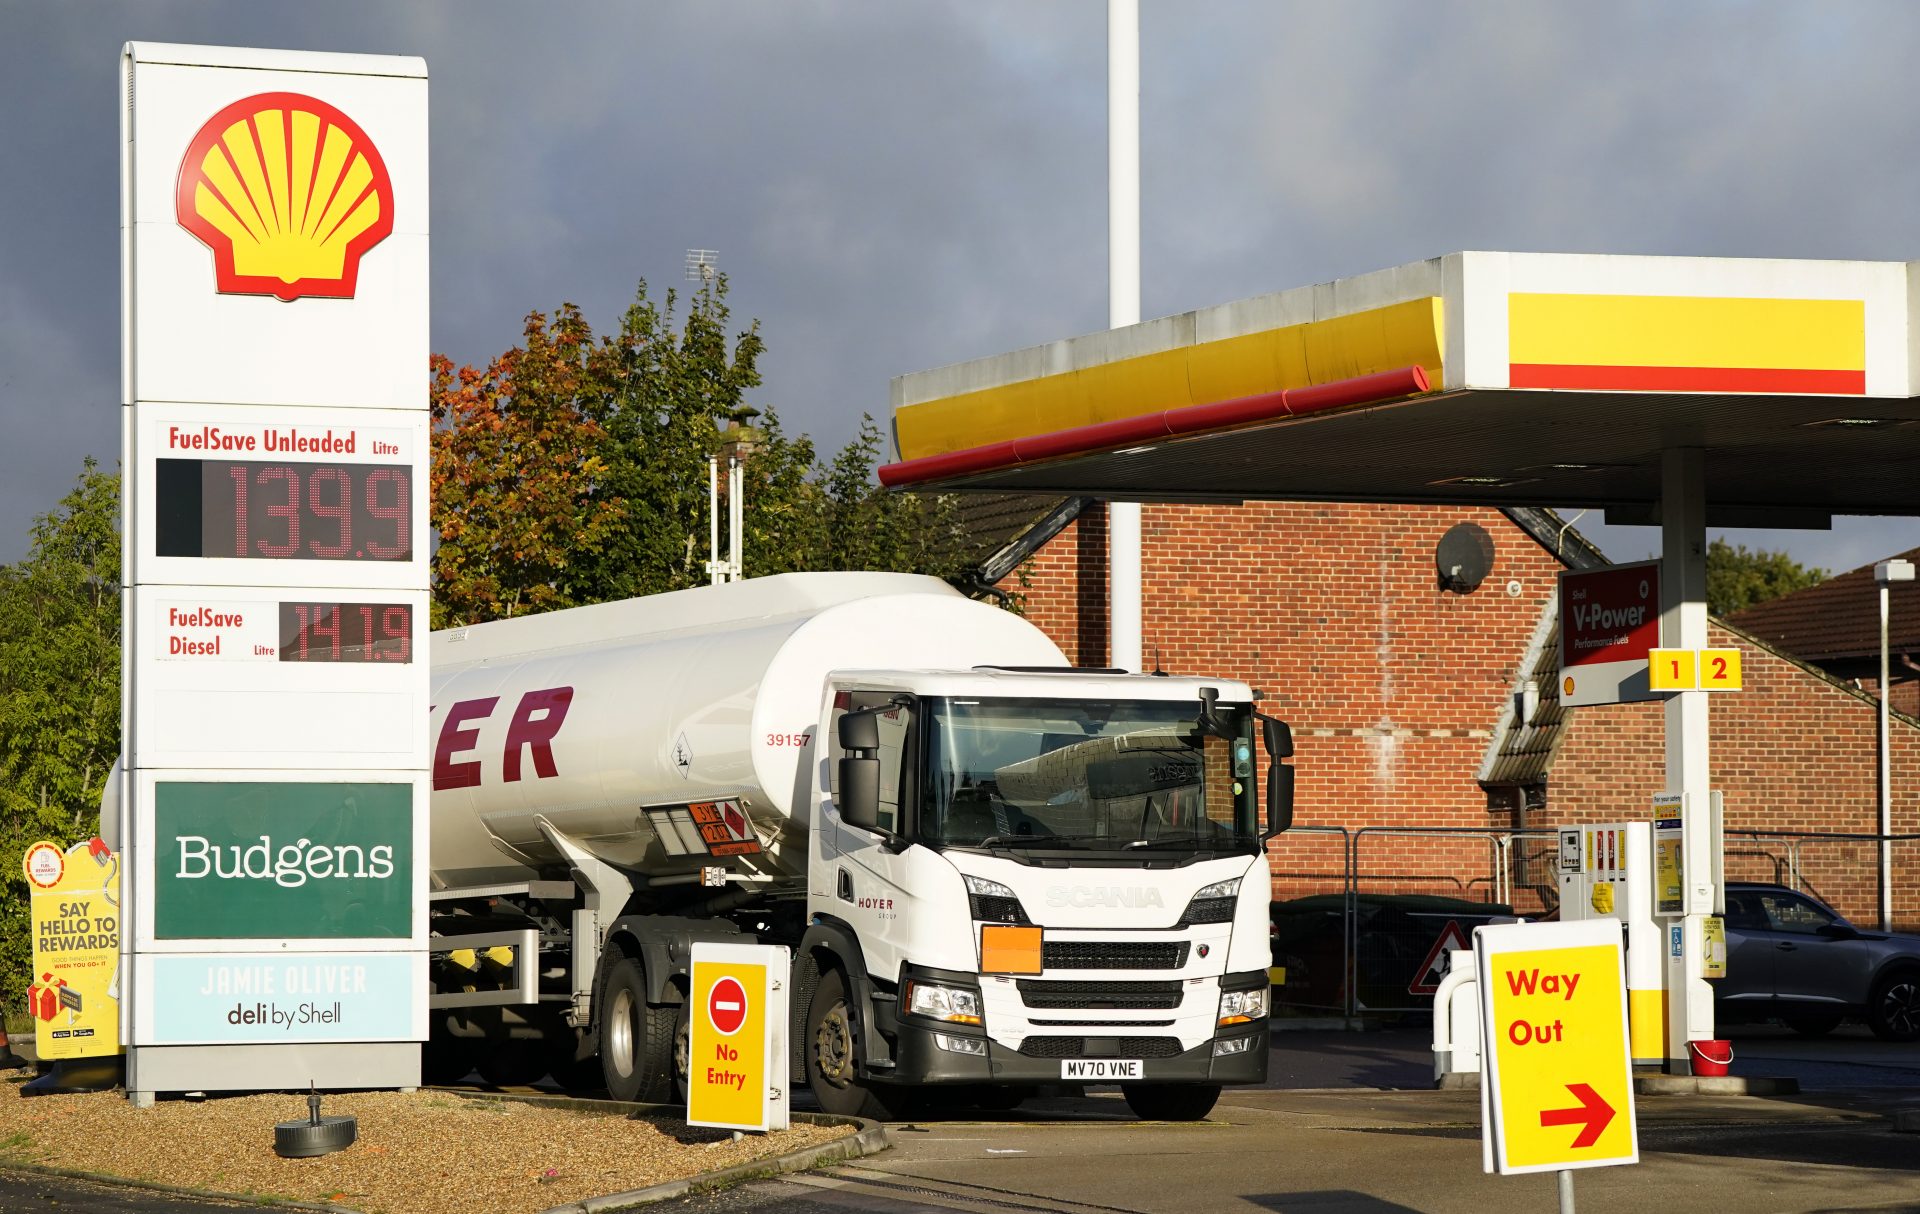 A Hoyer tanker makes a delivery at a Shell petrol station. Photo: Andrew Matthews/PA Wire/PA Images.